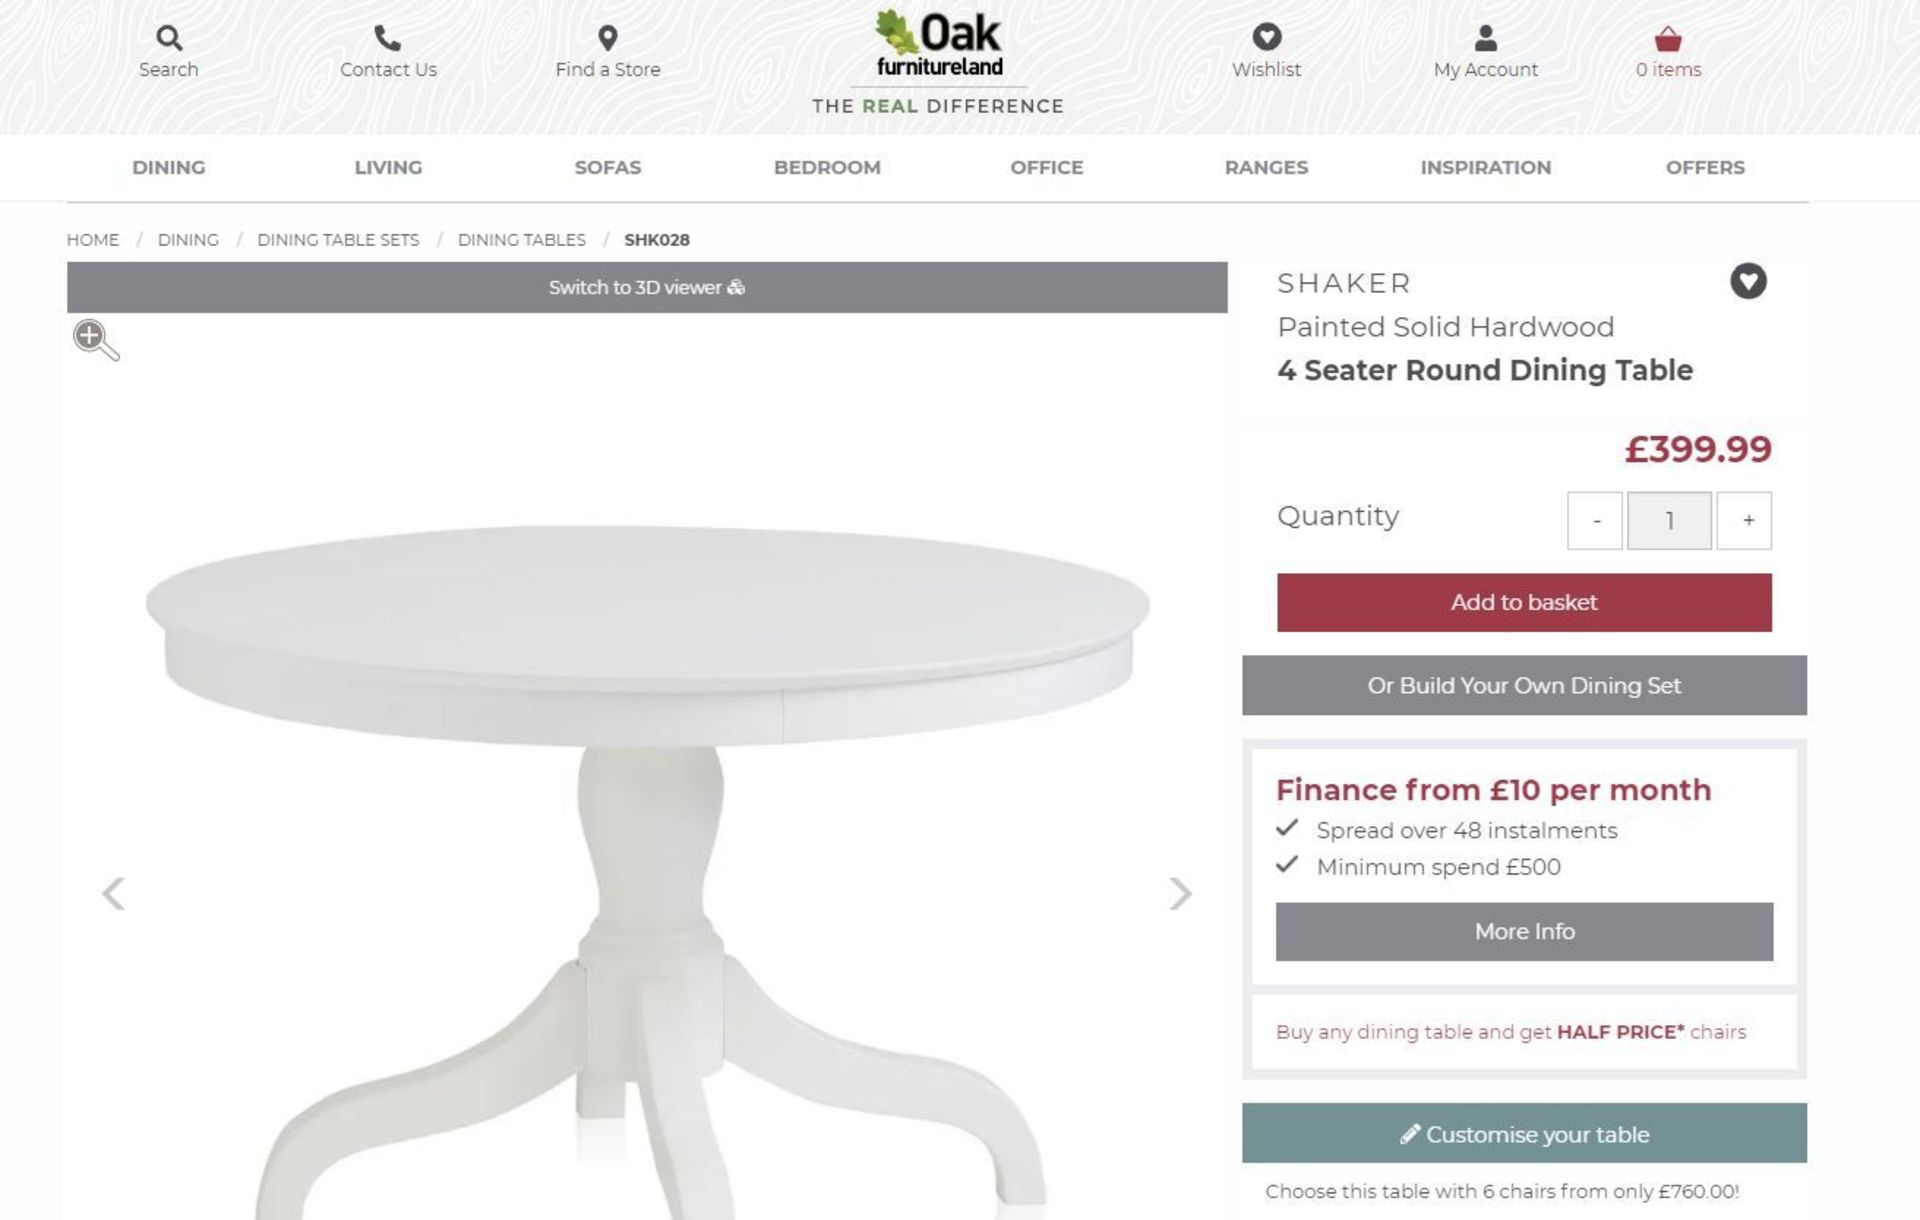 NEW BOXED Shaker Hardwood Painted Hardwood 4 Seater Dining Table. RRP £399.99. - Image 2 of 2